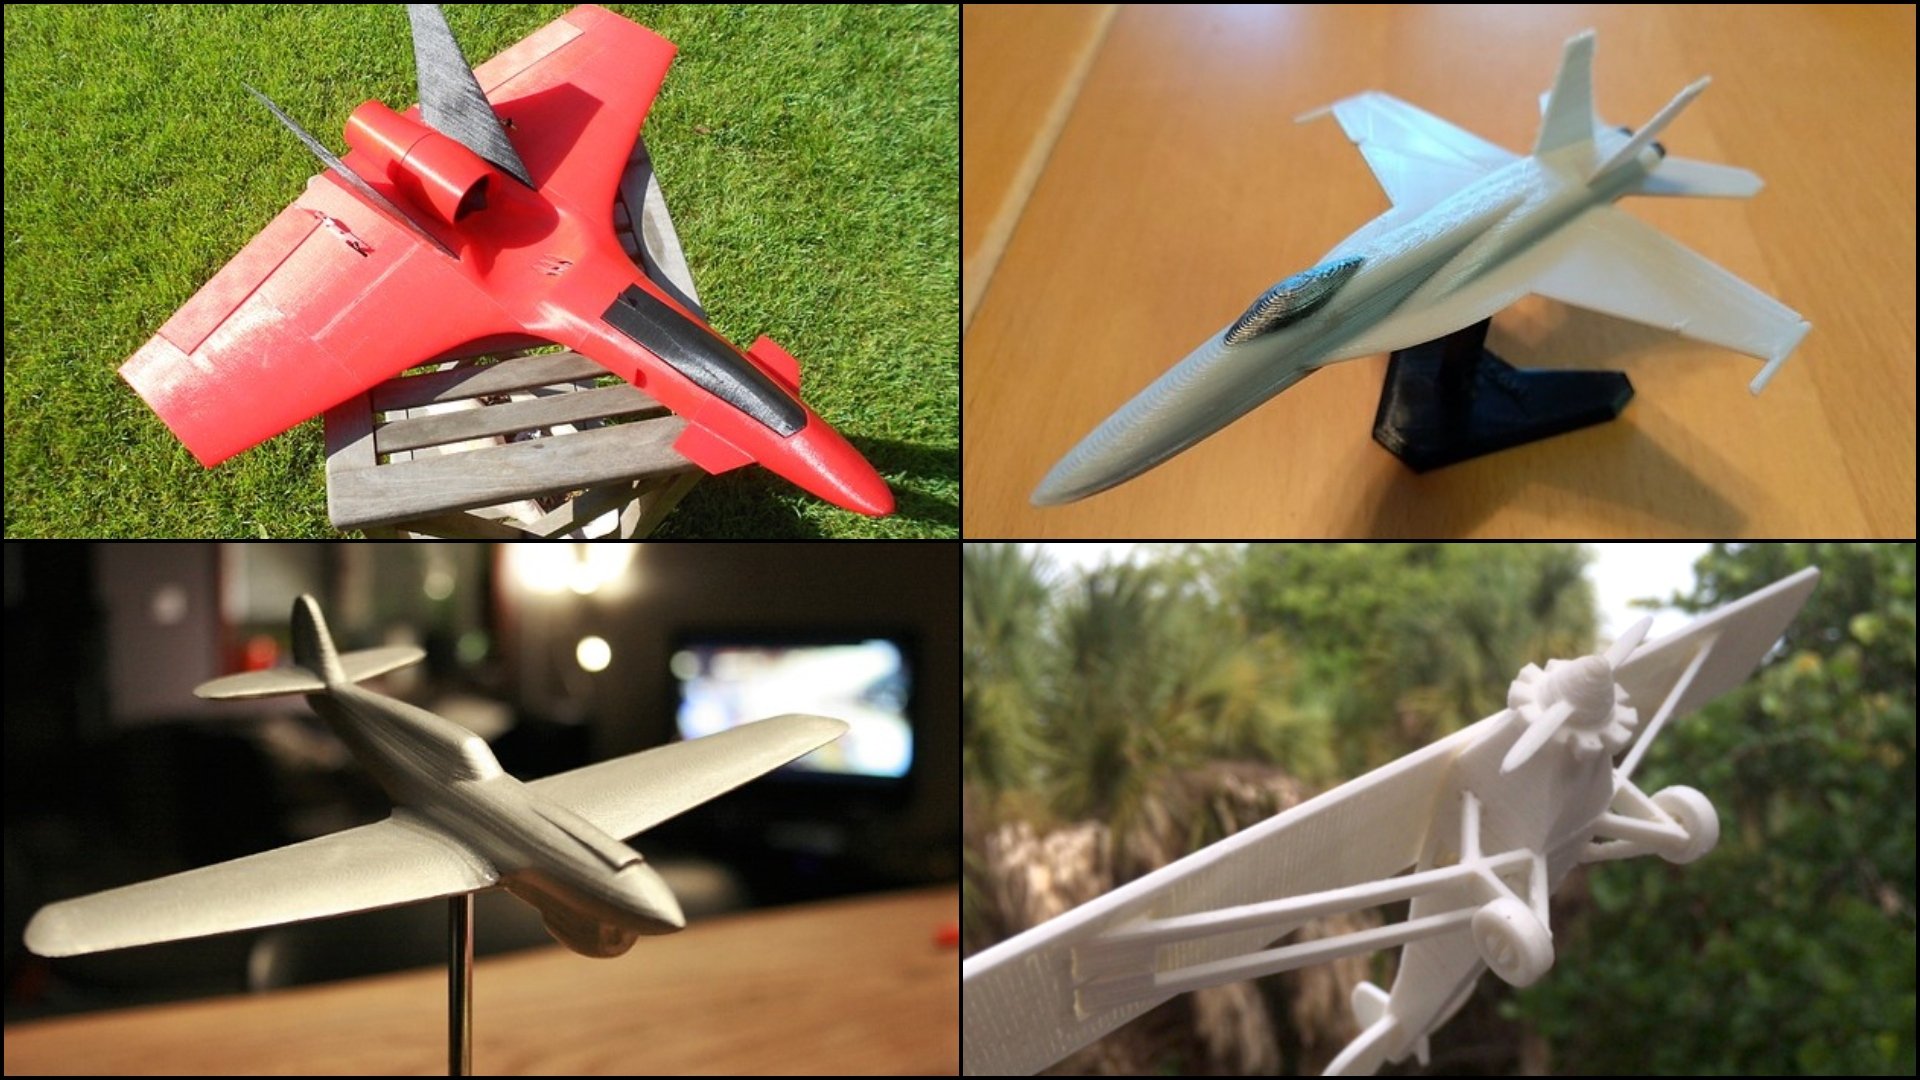 tiny toy airplanes